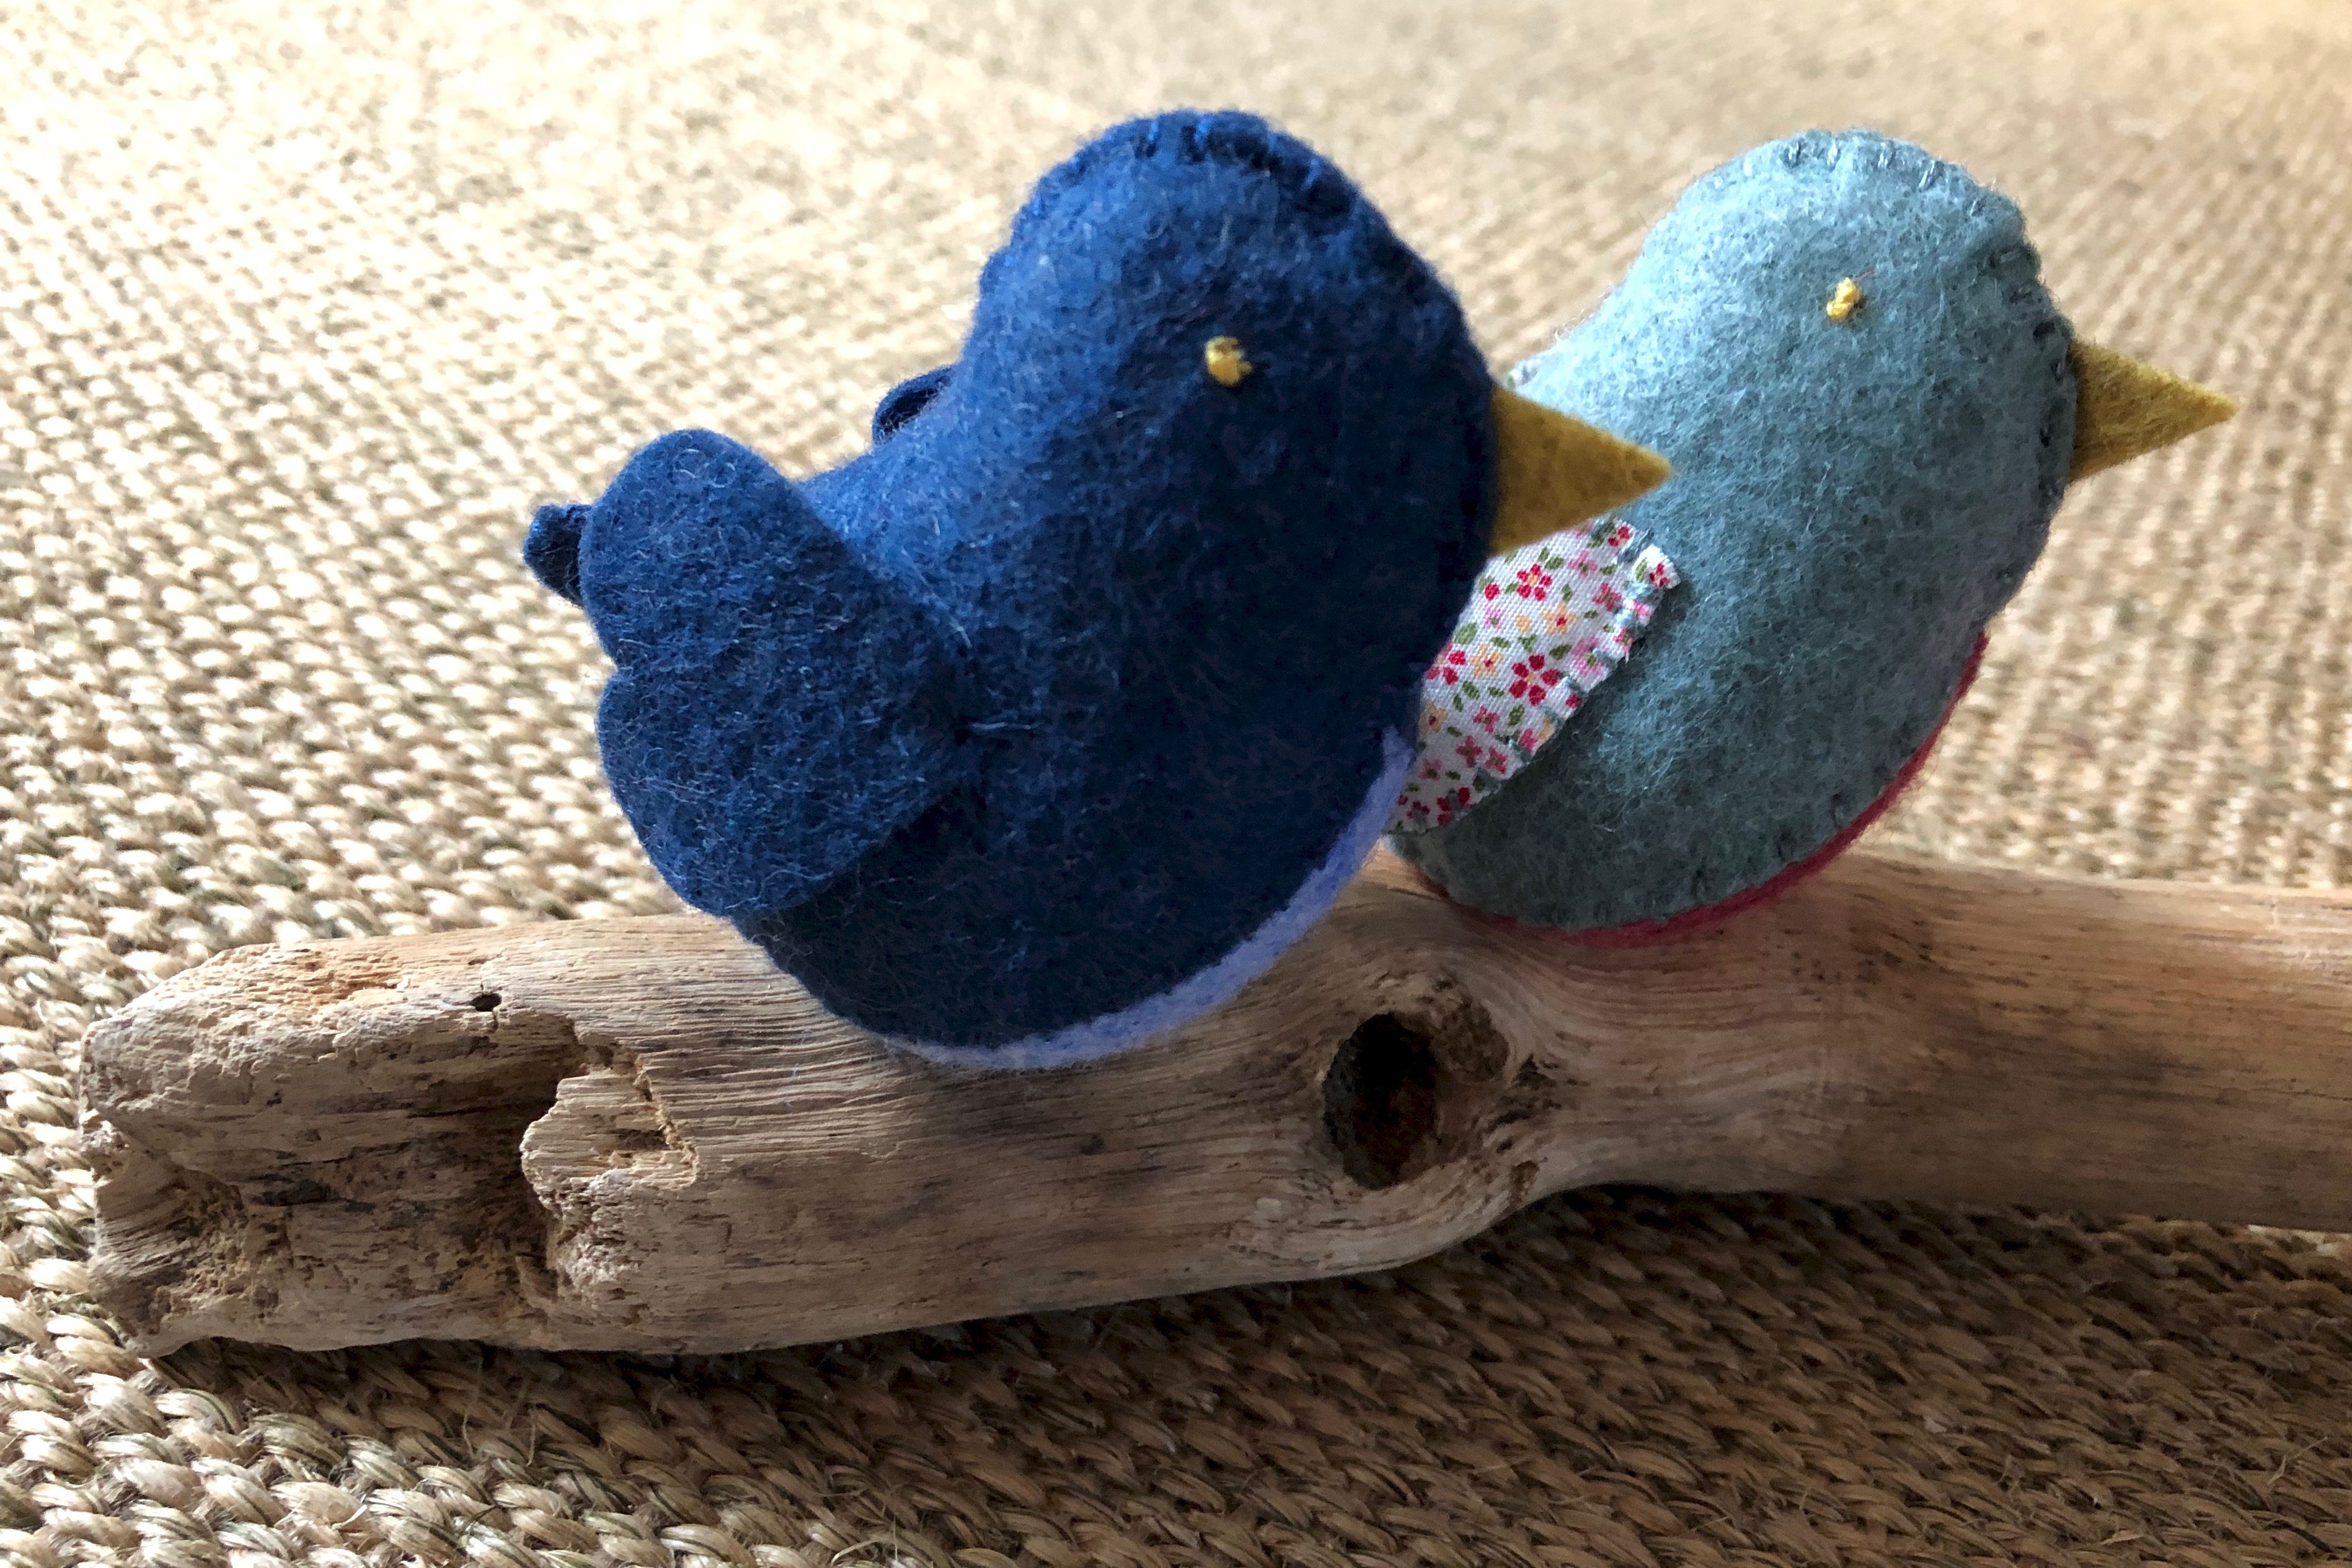 A family of 6 handmade and hand stitched felt and fabric birds sat on a drift wood log. Birds are made in a range of complimentary pastel shades of blue, green and pink with tiny flower fabric chests or wings.